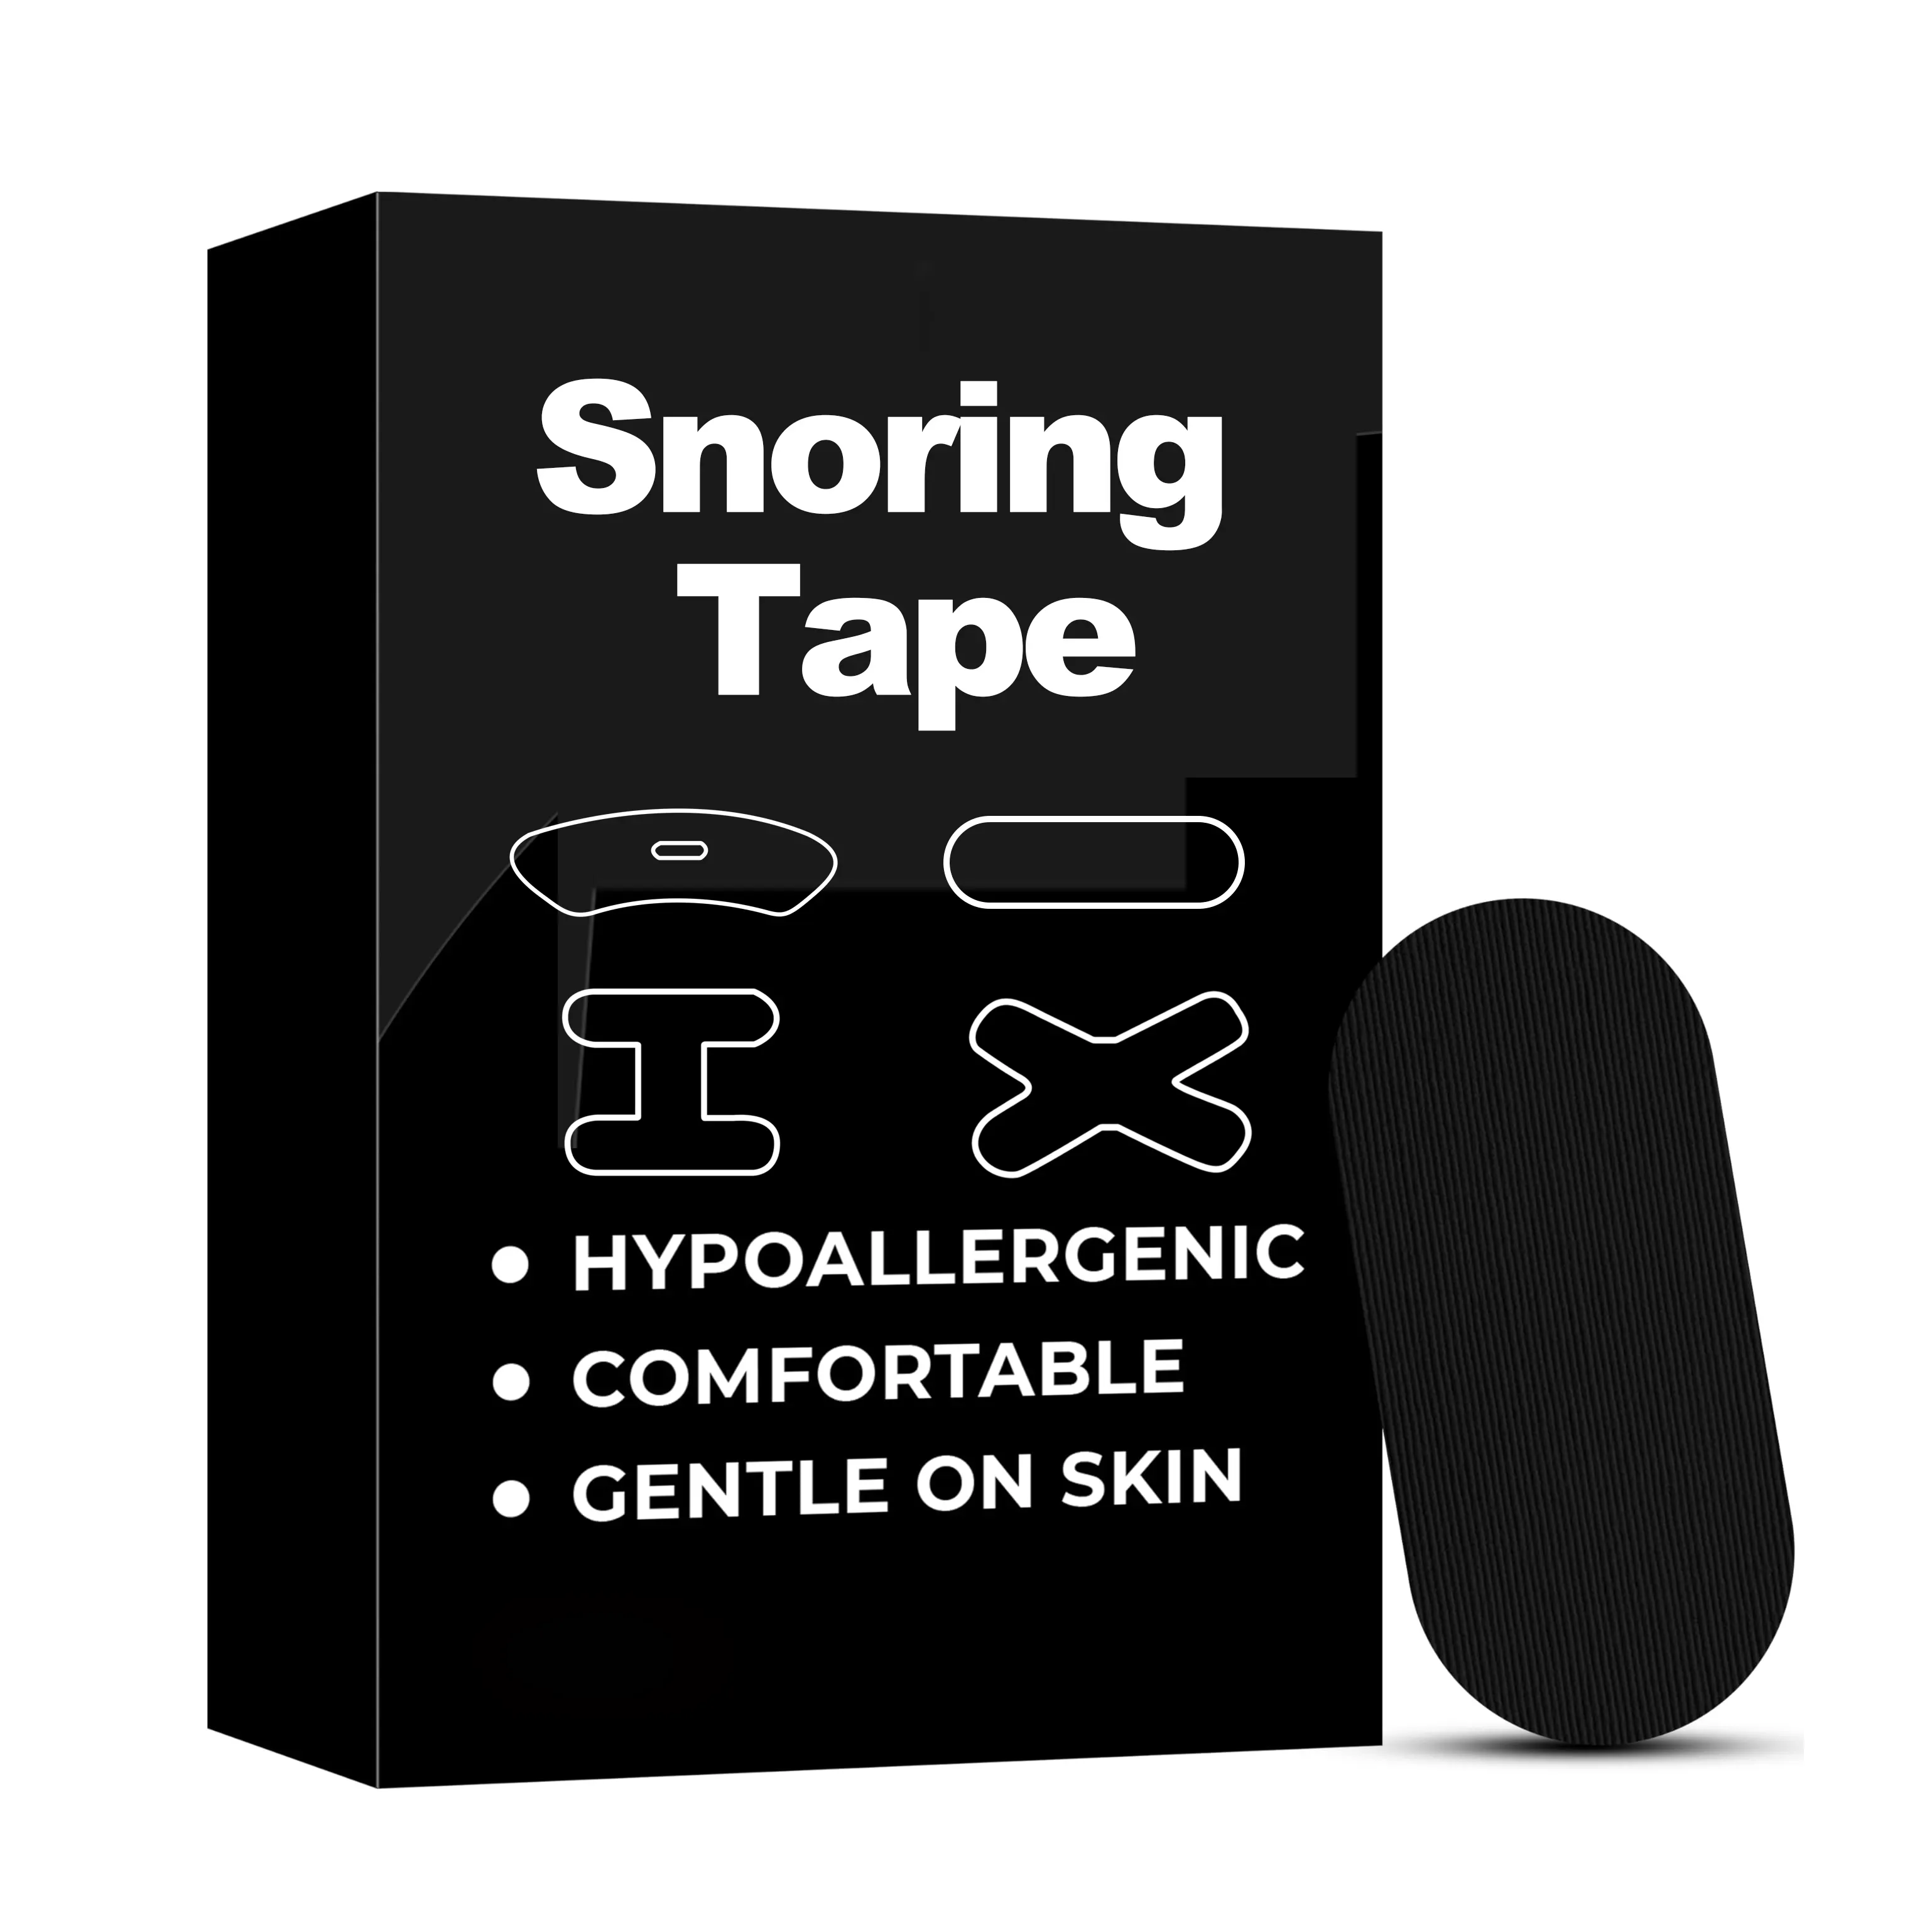 Hostage Snoring Sleep Mouth Tape for Sleeping And Reduced Snoring